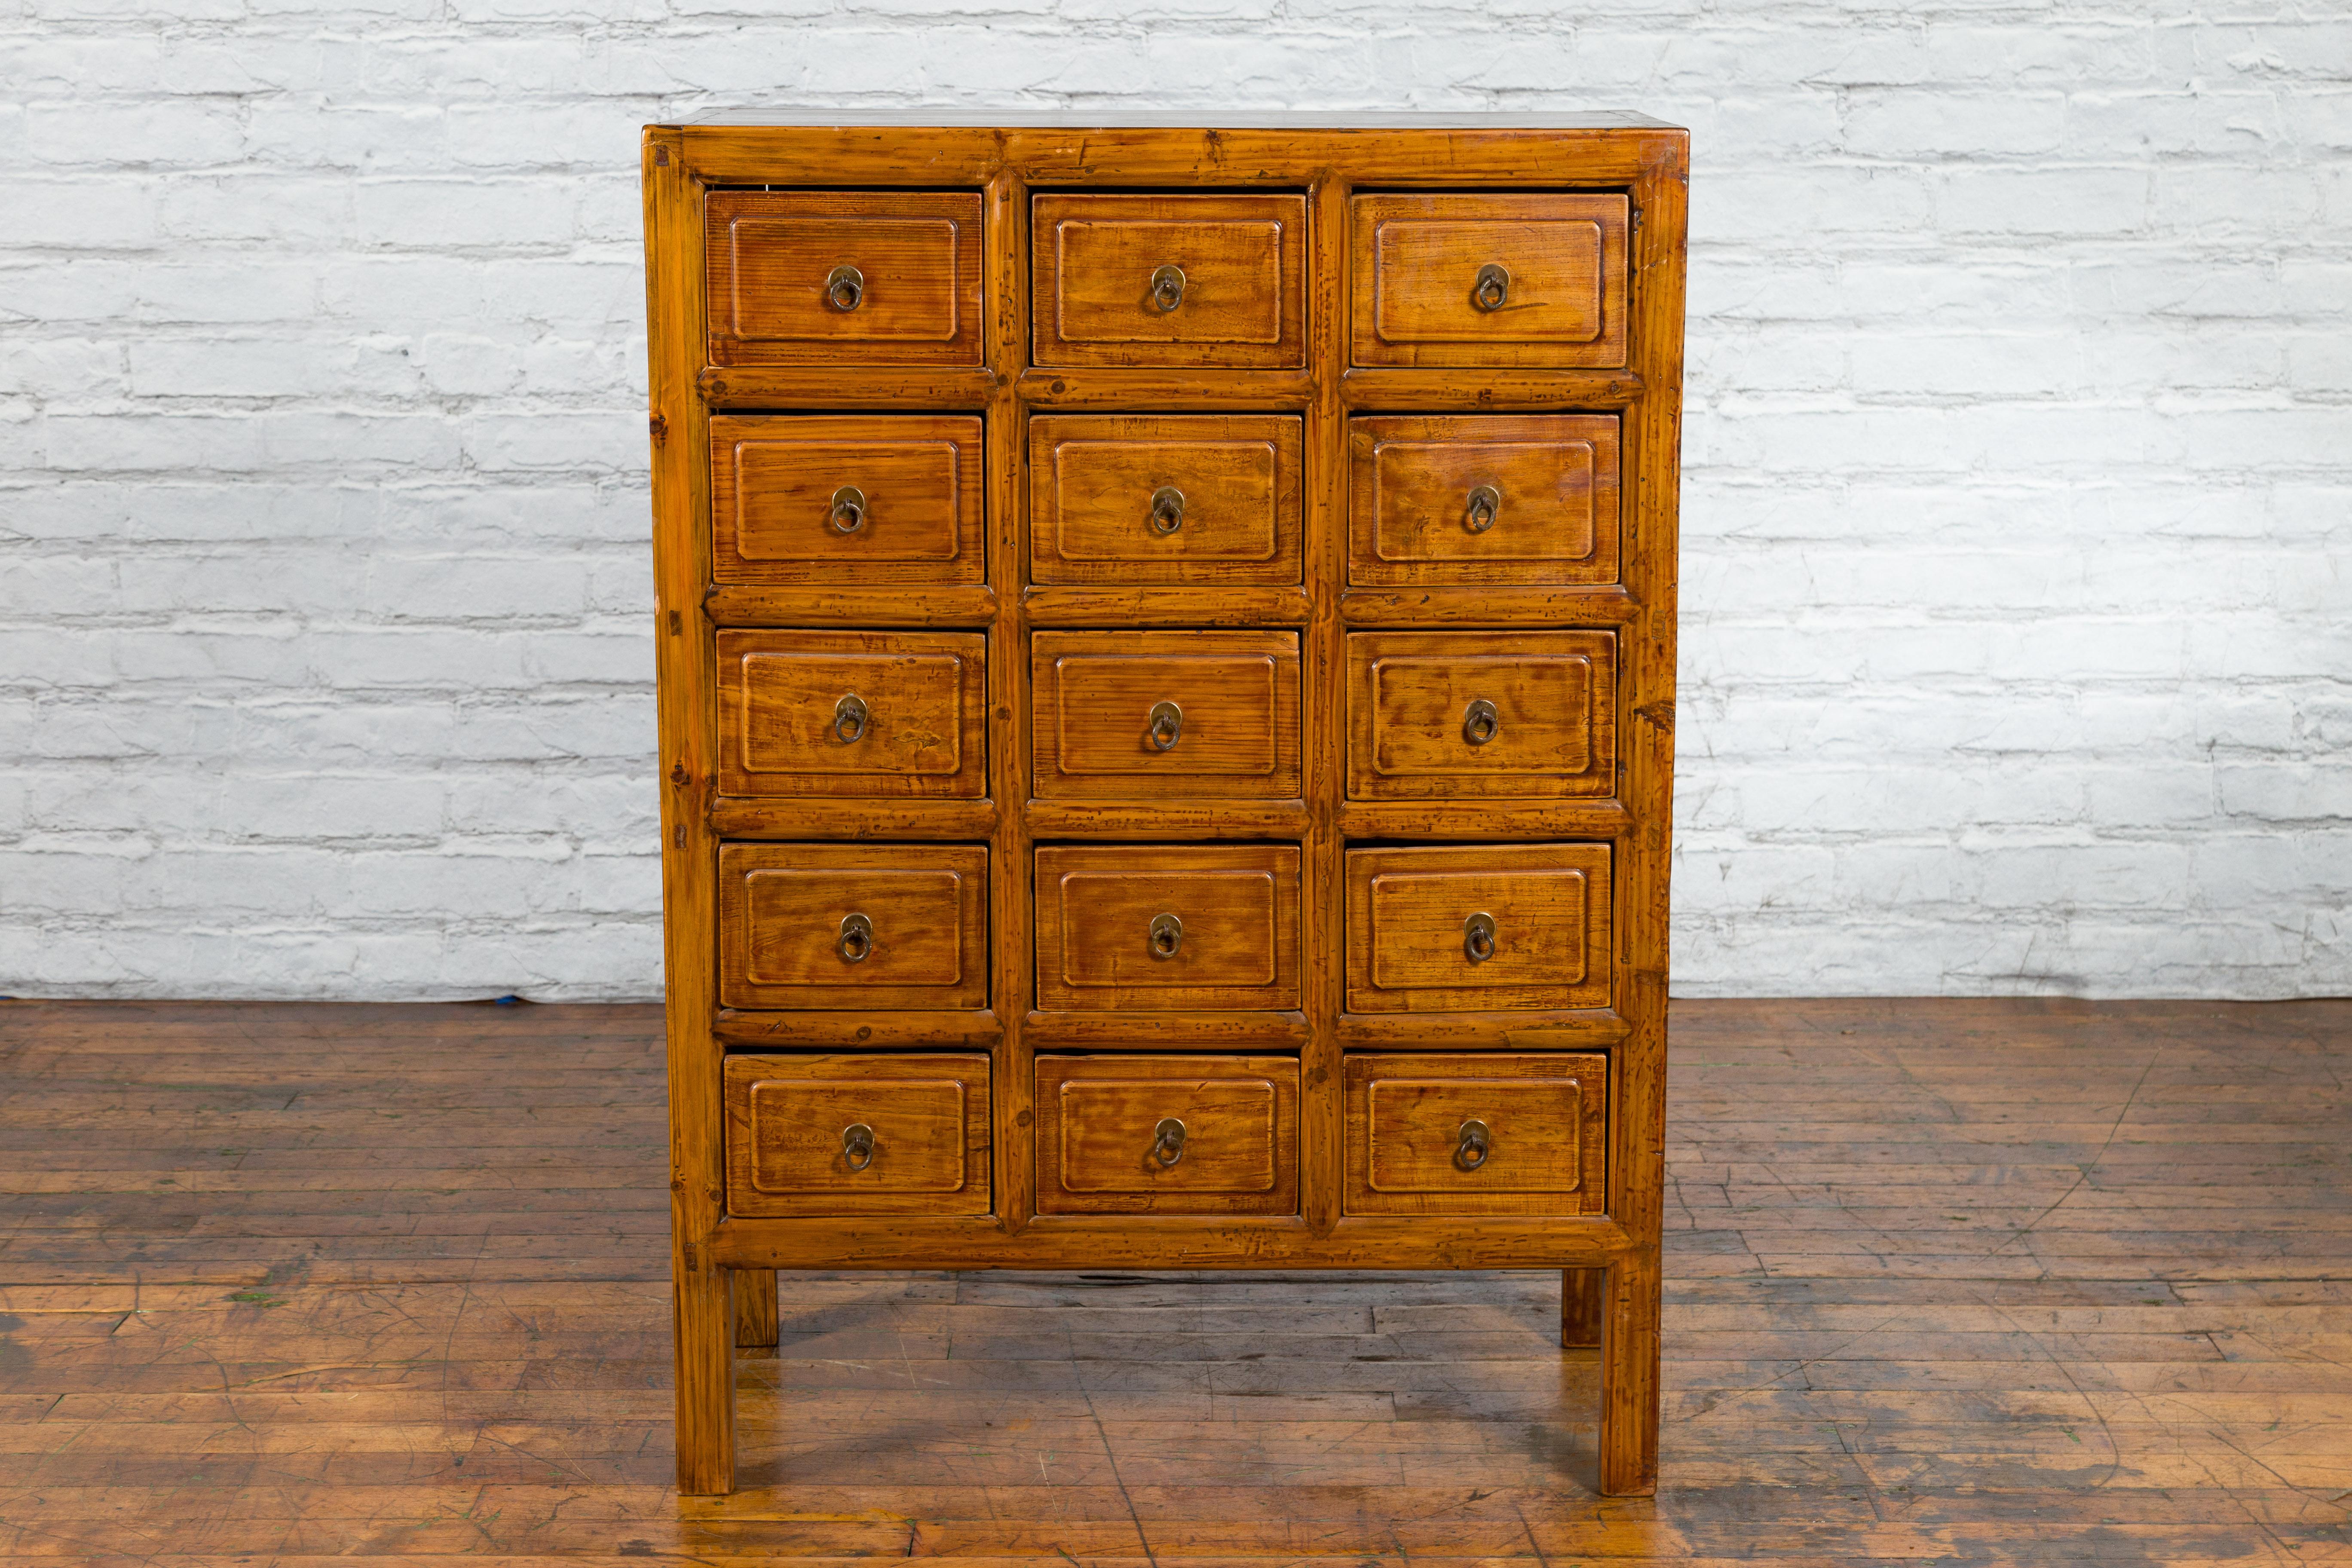 A Chinese apothecary cabinet from the early 20th century, with 15 drawers, light brown finish and straight legs. We currently have a pair available, however we are selling them individually $4,400 each. Created in China during the early years of the